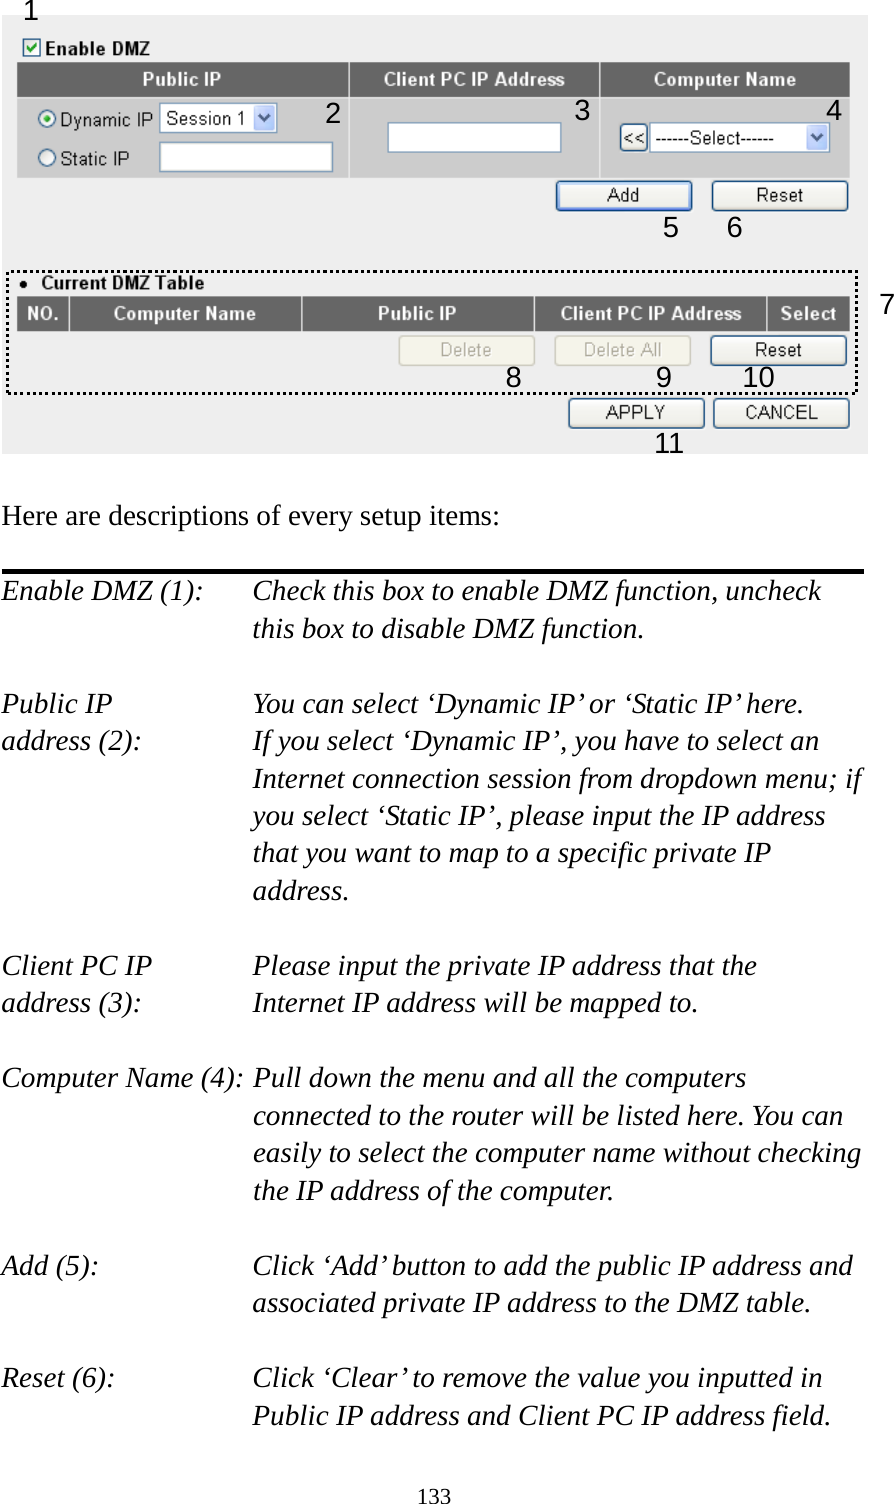 133   Here are descriptions of every setup items:  Enable DMZ (1):   Check this box to enable DMZ function, uncheck this box to disable DMZ function.  Public IP        You can select ‘Dynamic IP’ or ‘Static IP’ here. address (2):    If you select ‘Dynamic IP’, you have to select an Internet connection session from dropdown menu; if you select ‘Static IP’, please input the IP address that you want to map to a specific private IP address.  Client PC IP      Please input the private IP address that the address (3):      Internet IP address will be mapped to.  Computer Name (4): Pull down the menu and all the computers connected to the router will be listed here. You can easily to select the computer name without checking the IP address of the computer.  Add (5):    Click ‘Add’ button to add the public IP address and associated private IP address to the DMZ table.  Reset (6):    Click ‘Clear’ to remove the value you inputted in Public IP address and Client PC IP address field. 1 2 4 5 6 7 8 9 10 11 3 